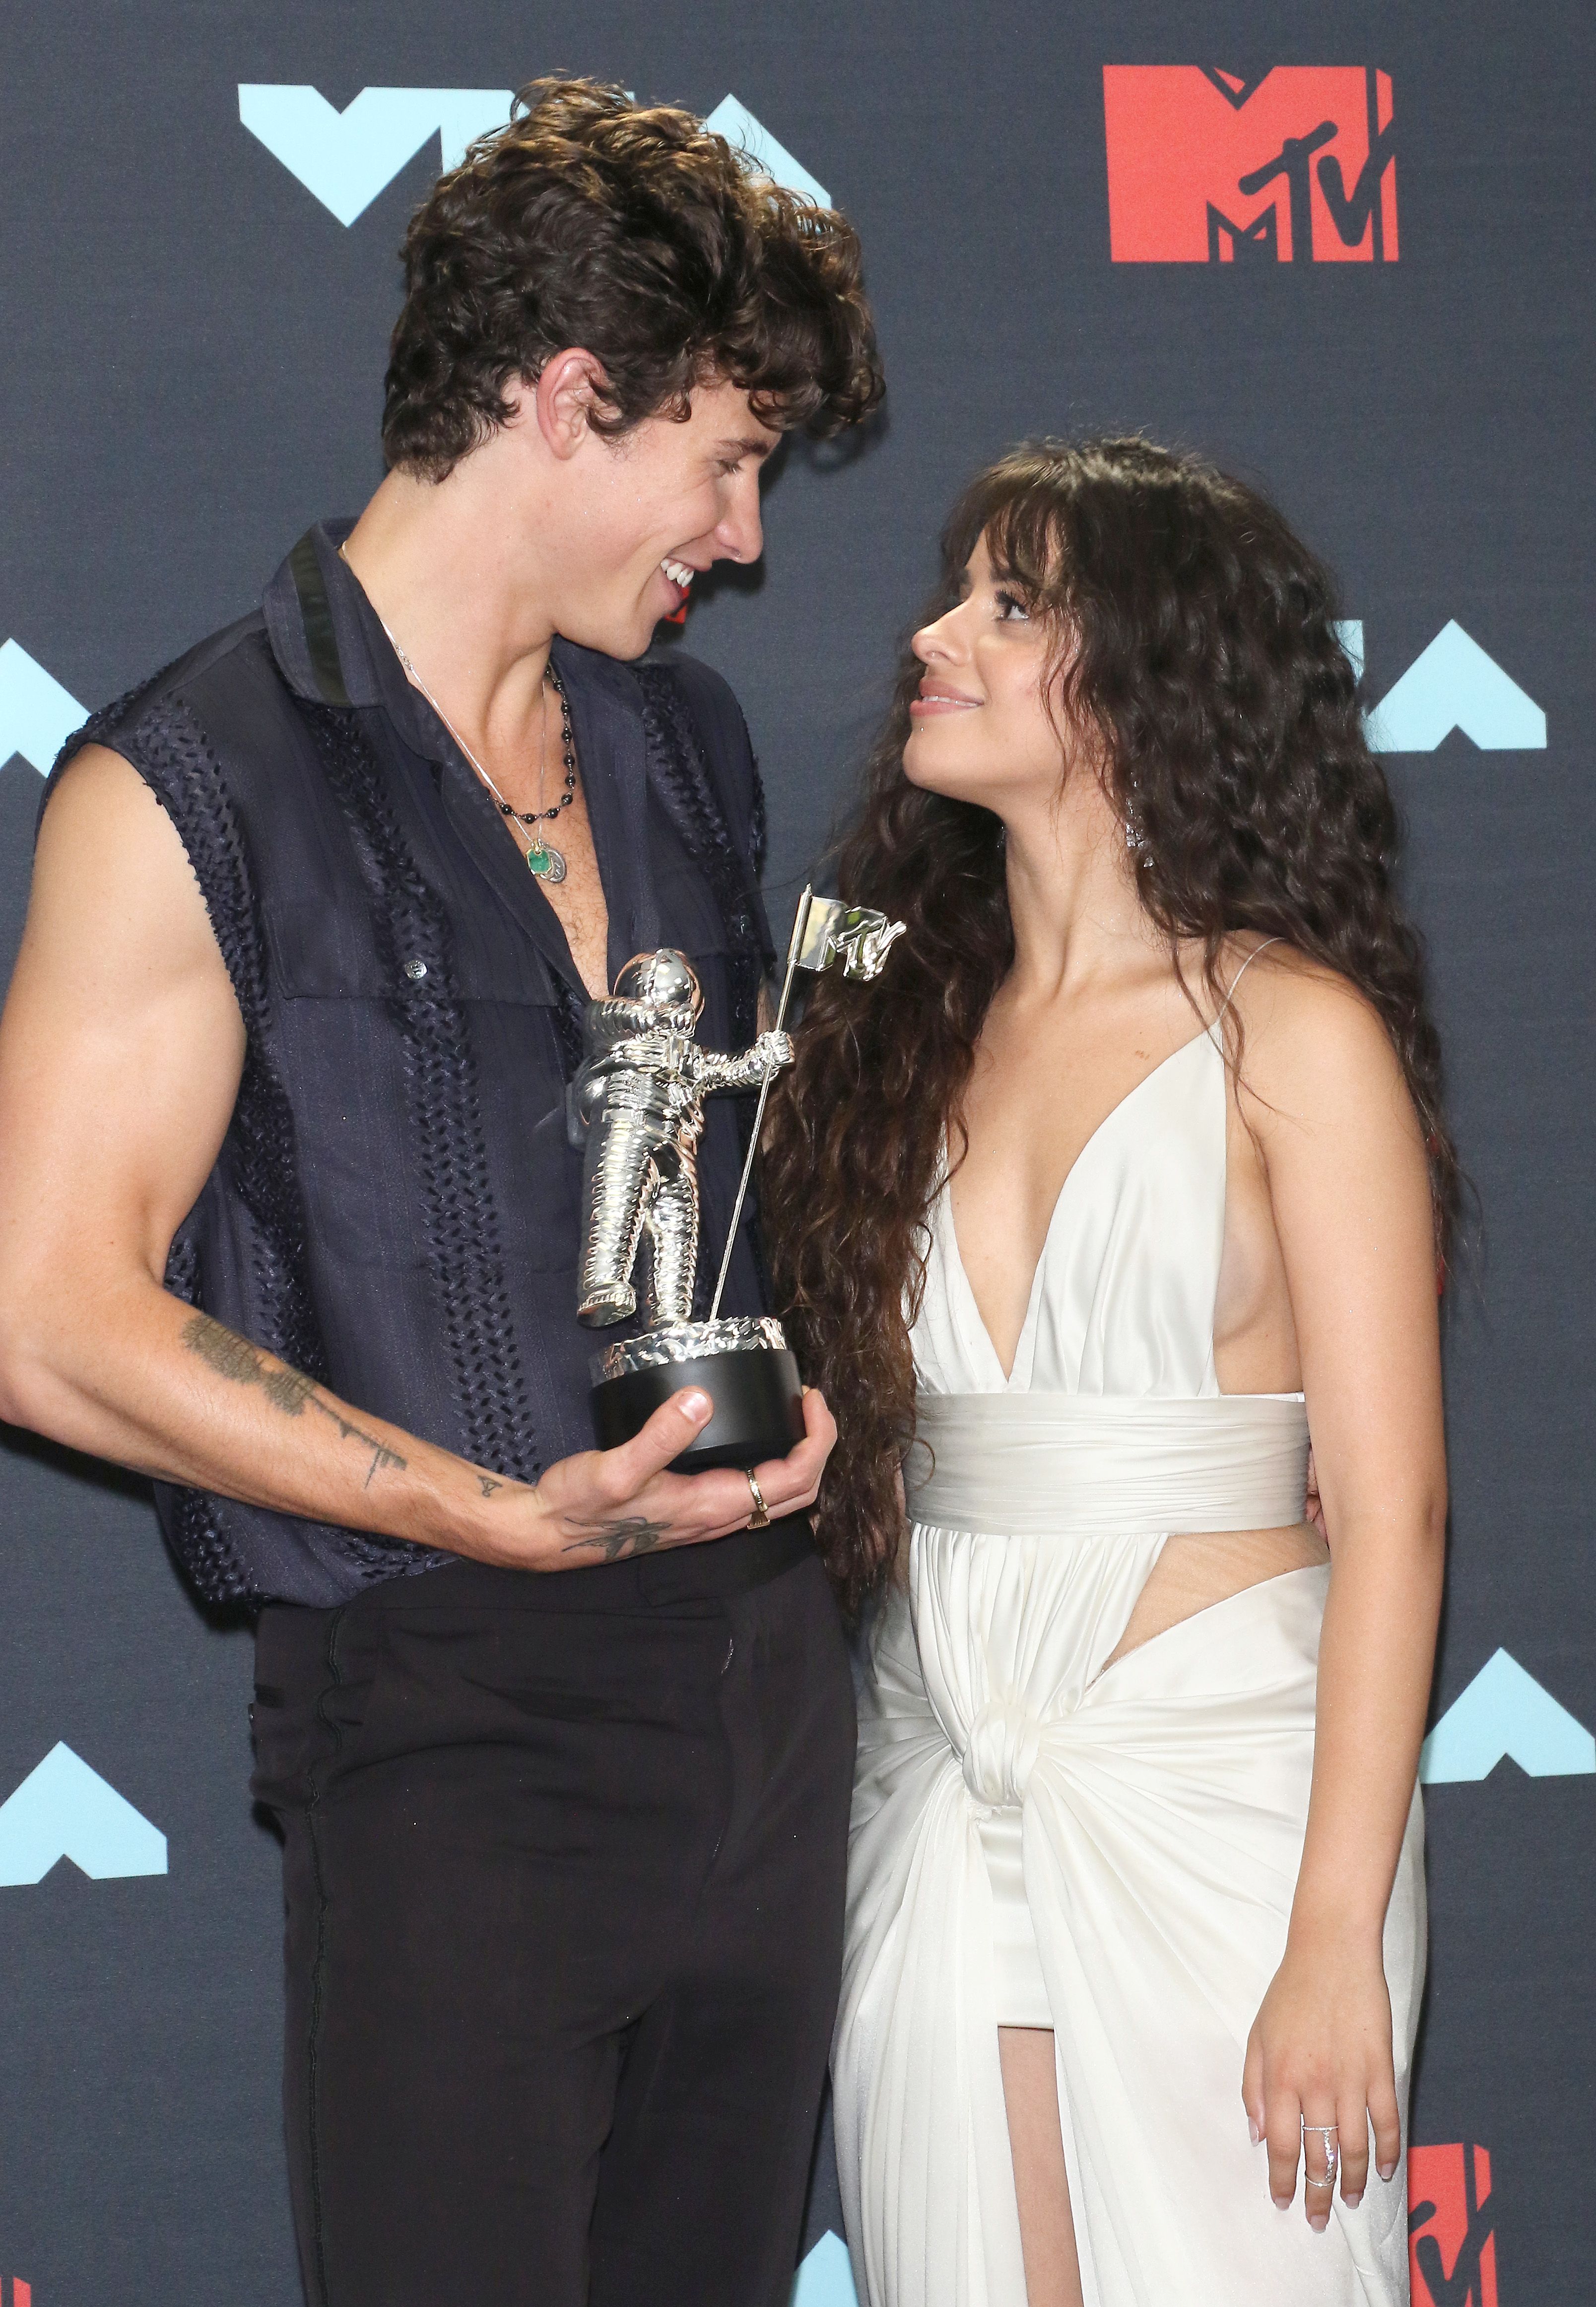 Camila Cabello Opens Up About Her Relationship with Shawn Mendes